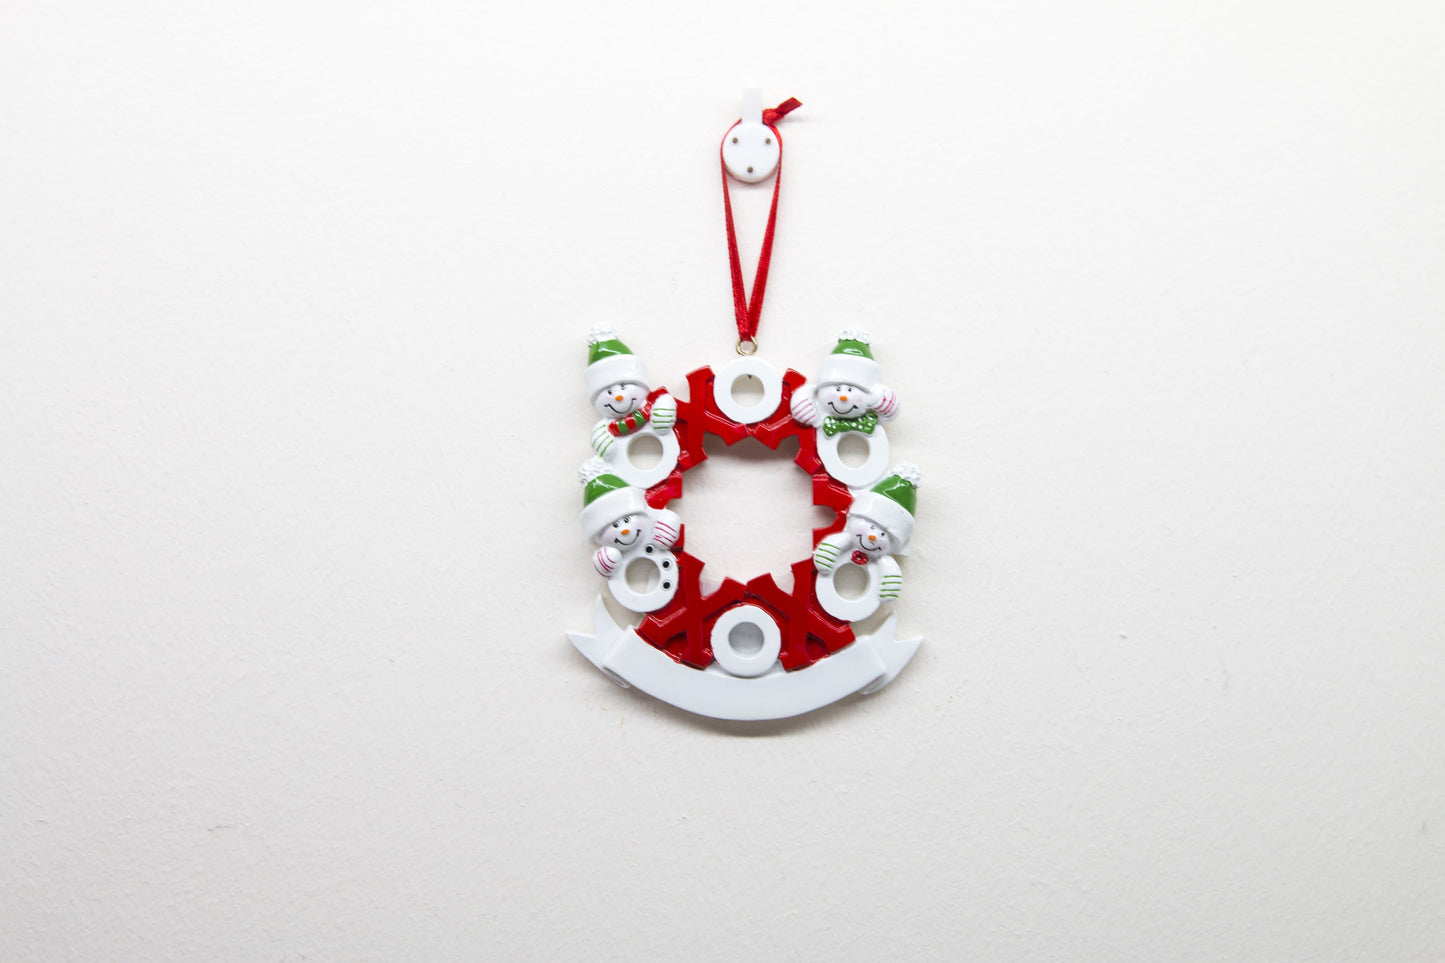 XOXO Wreath Snowman - Christmas Ornament (Suitable for Personalization)